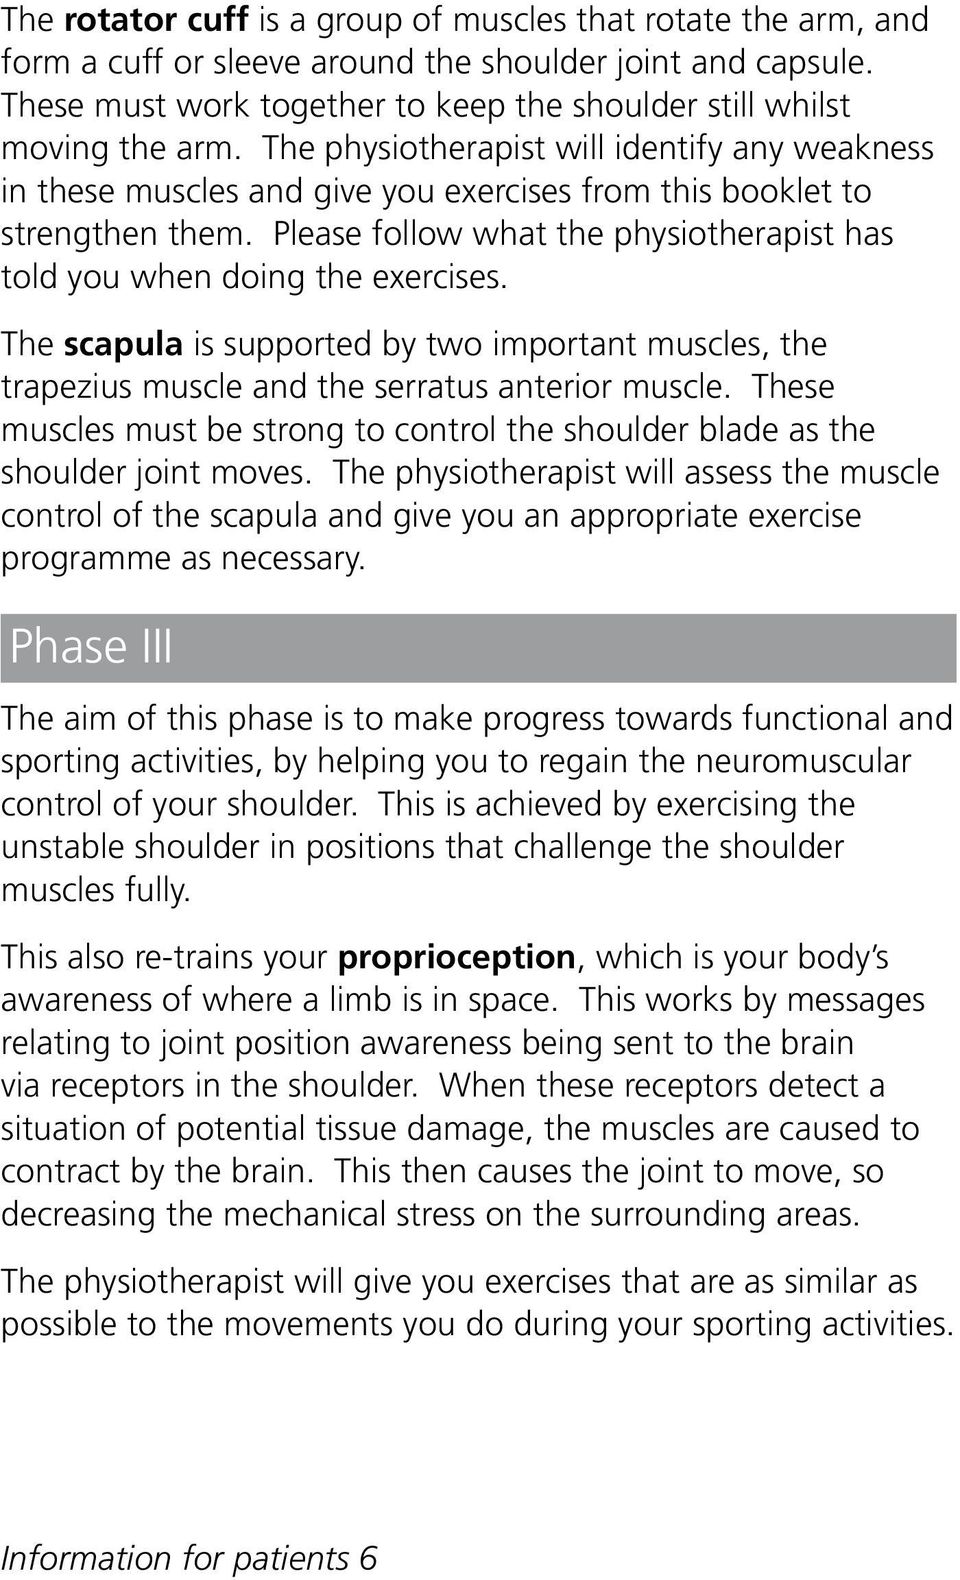 Please follow what the physiotherapist has told you when doing the exercises. The scapula is supported by two important muscles, the trapezius muscle and the serratus anterior muscle.